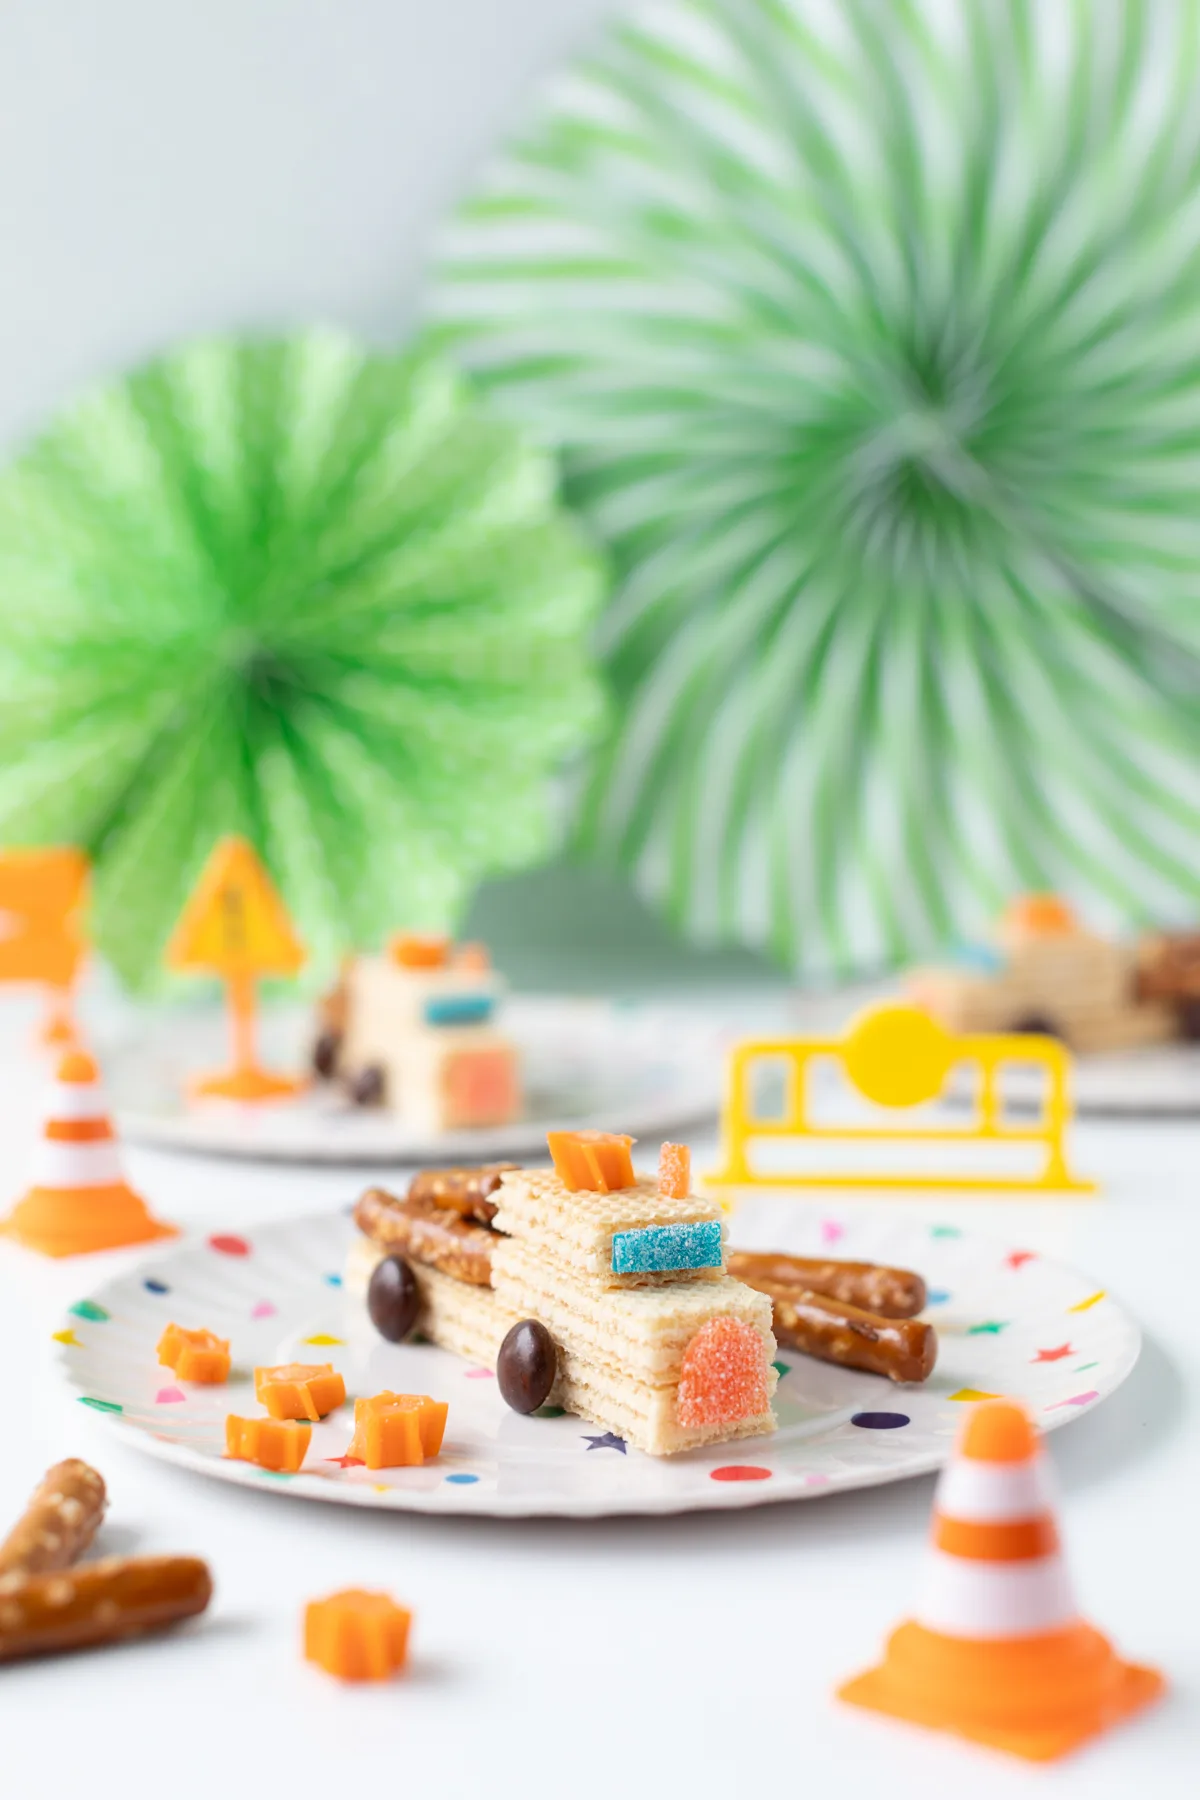 celebrate Rubble & Crew with edible construction trucks made with wafer cookies and candies